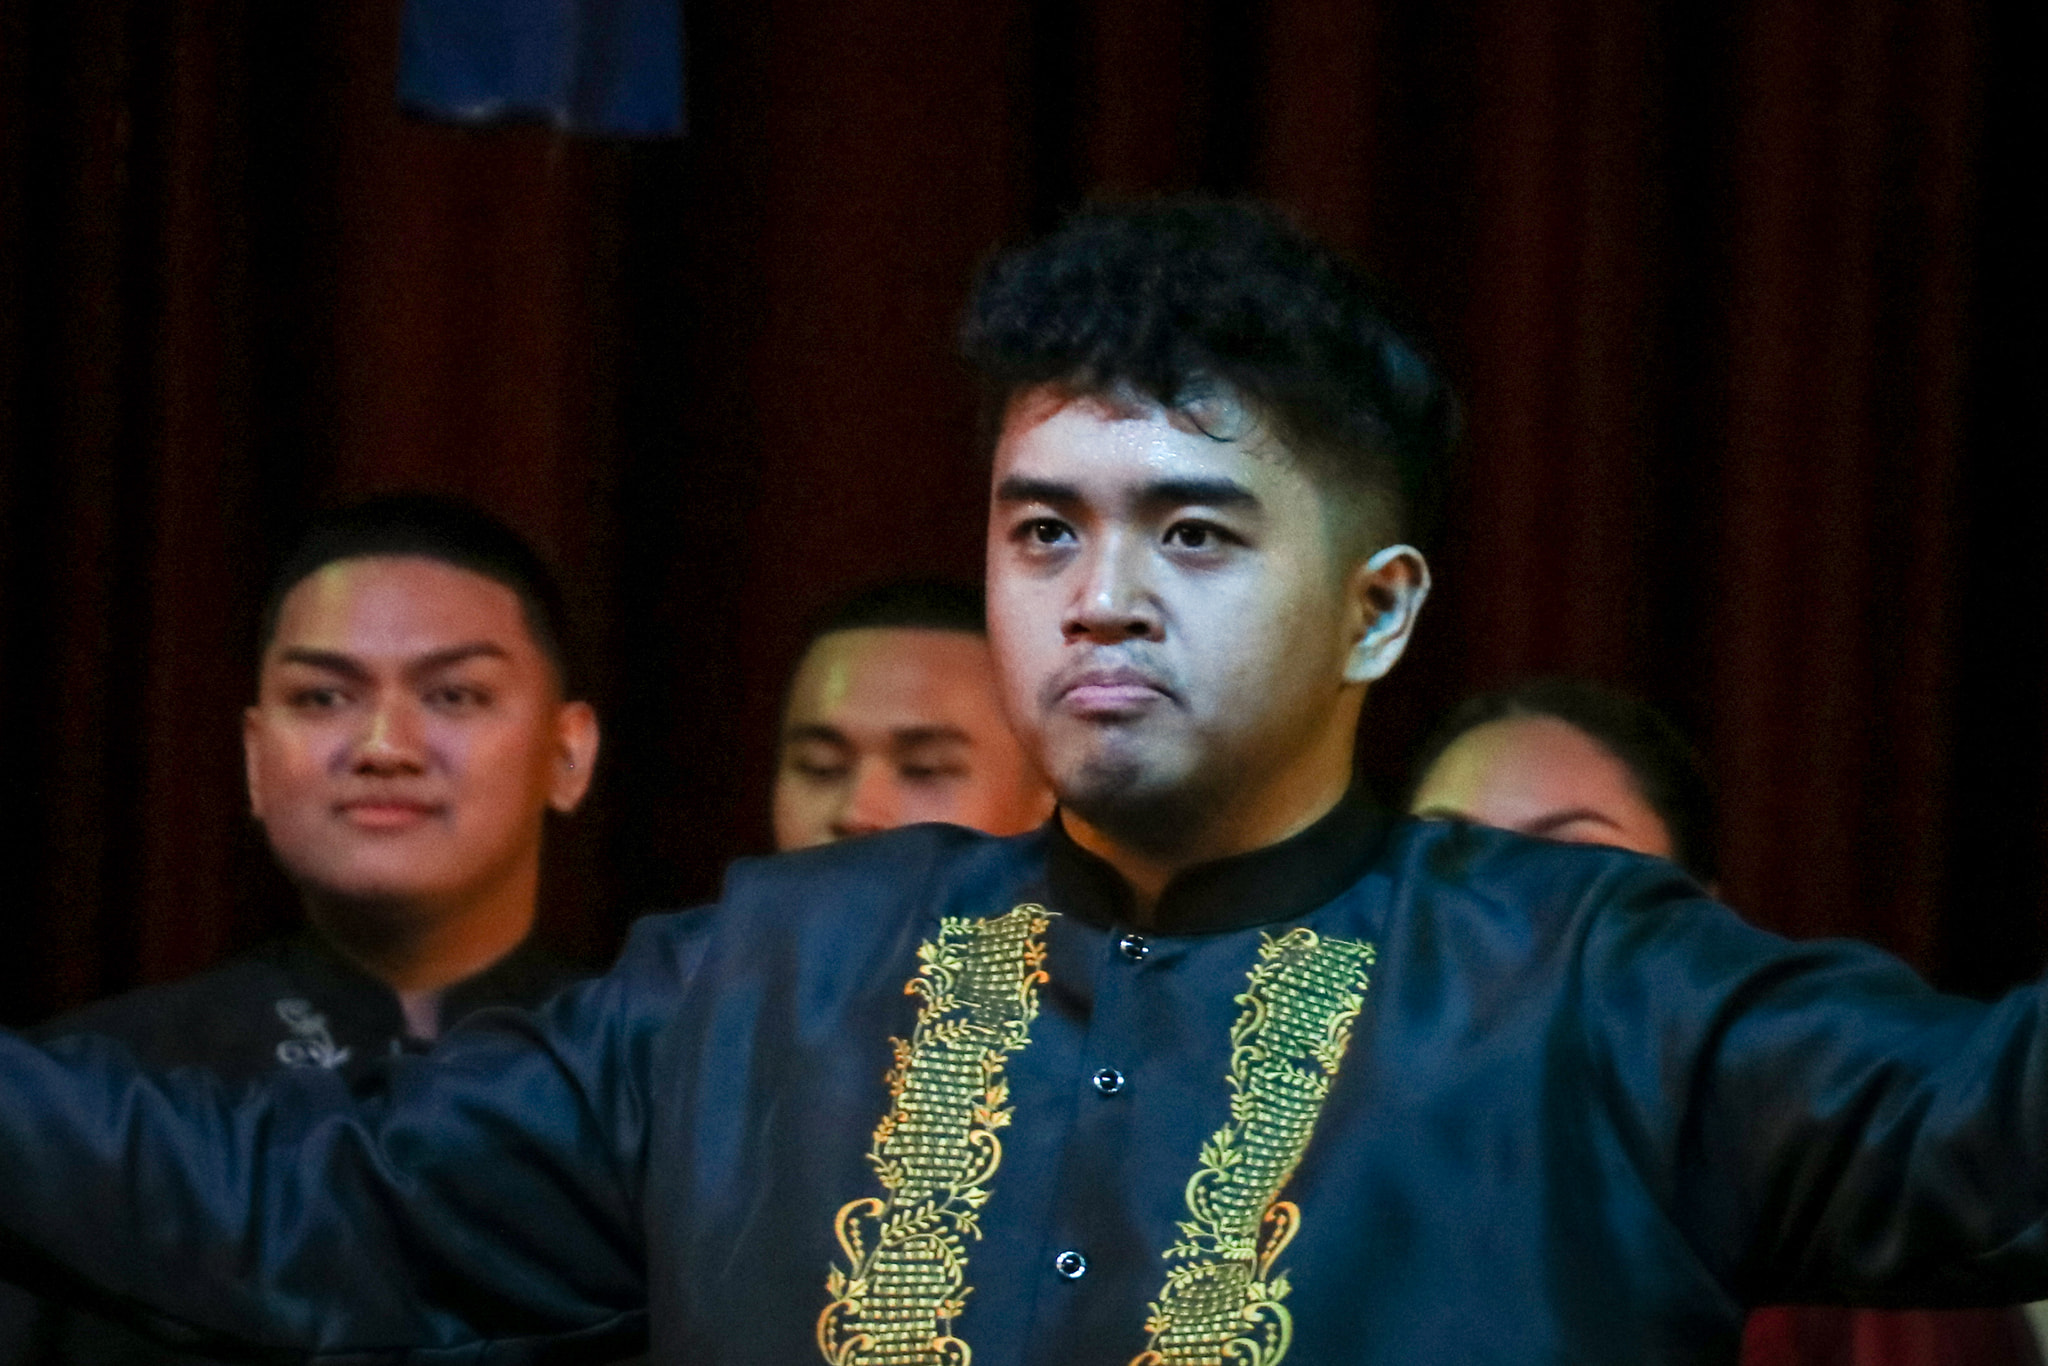 UST Singers' Mark Agpasa judged Composition Winner of 2019 Busan Choral  Festival & Competition